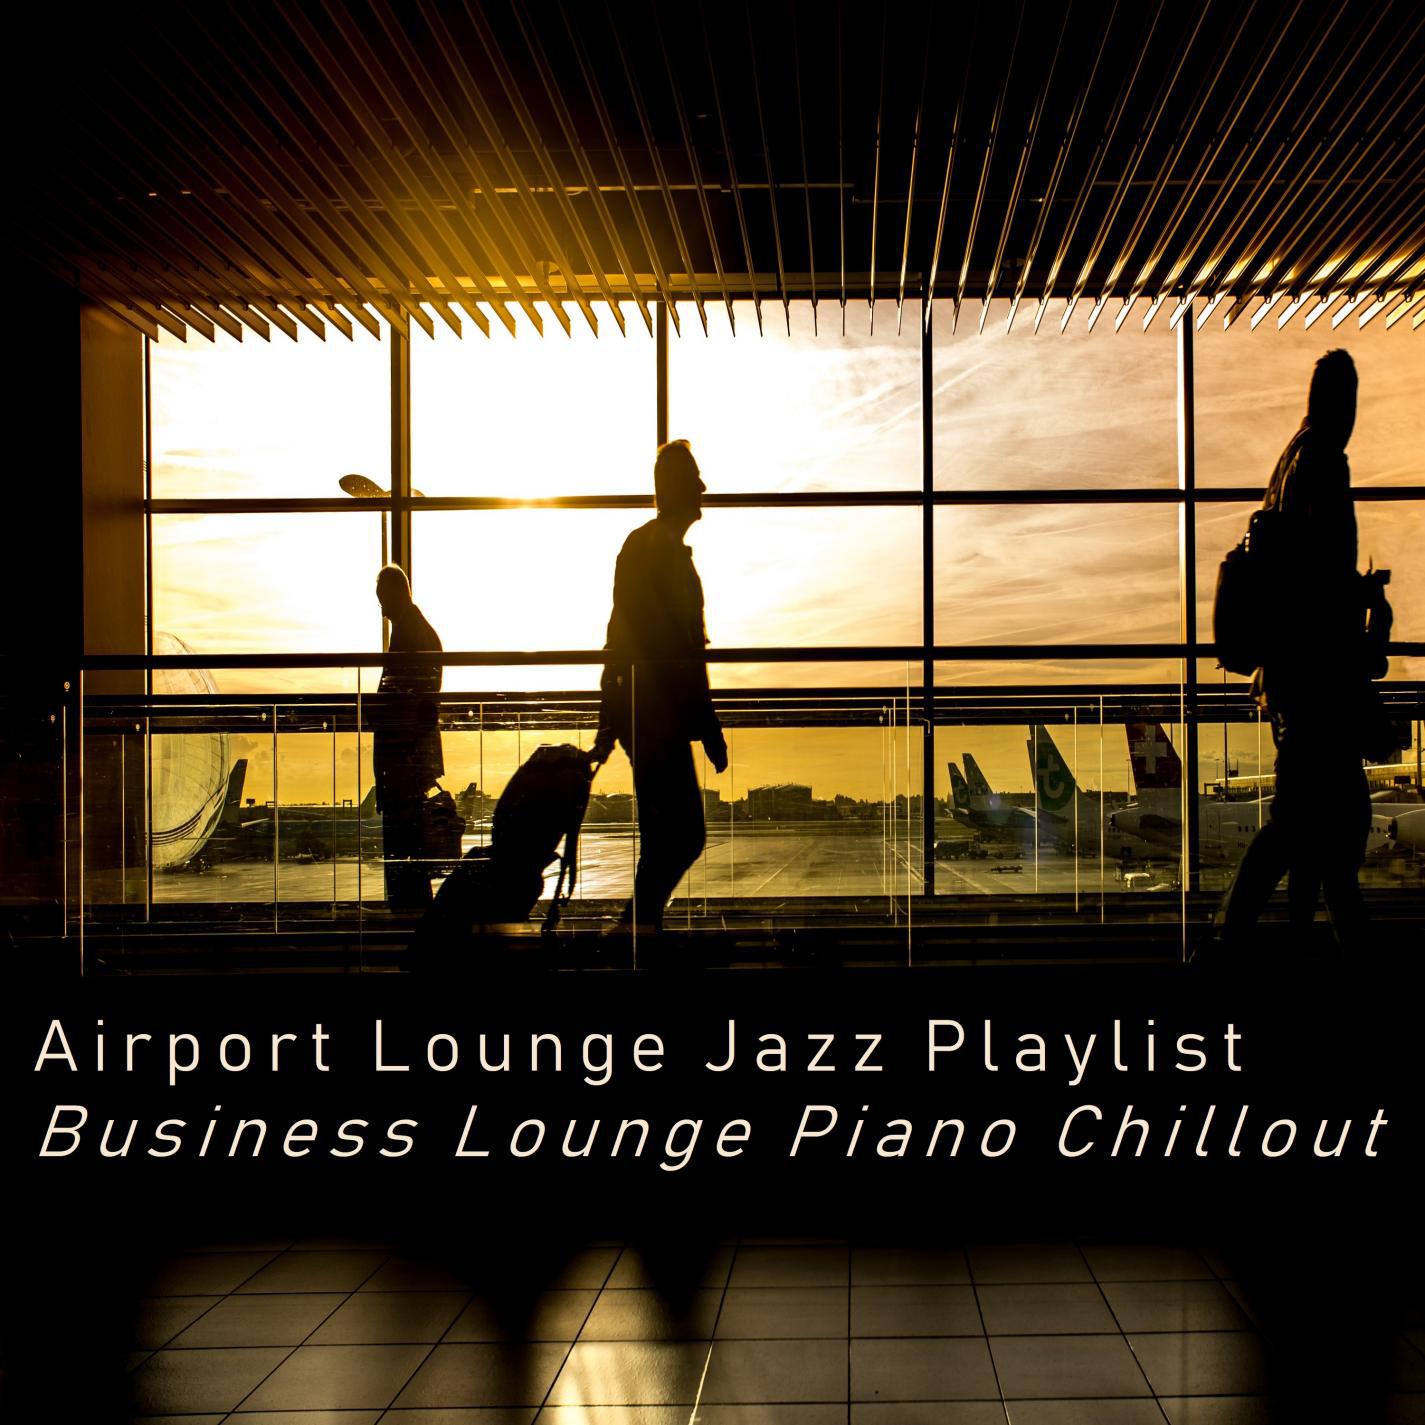 Business Lounge Piano Chillout